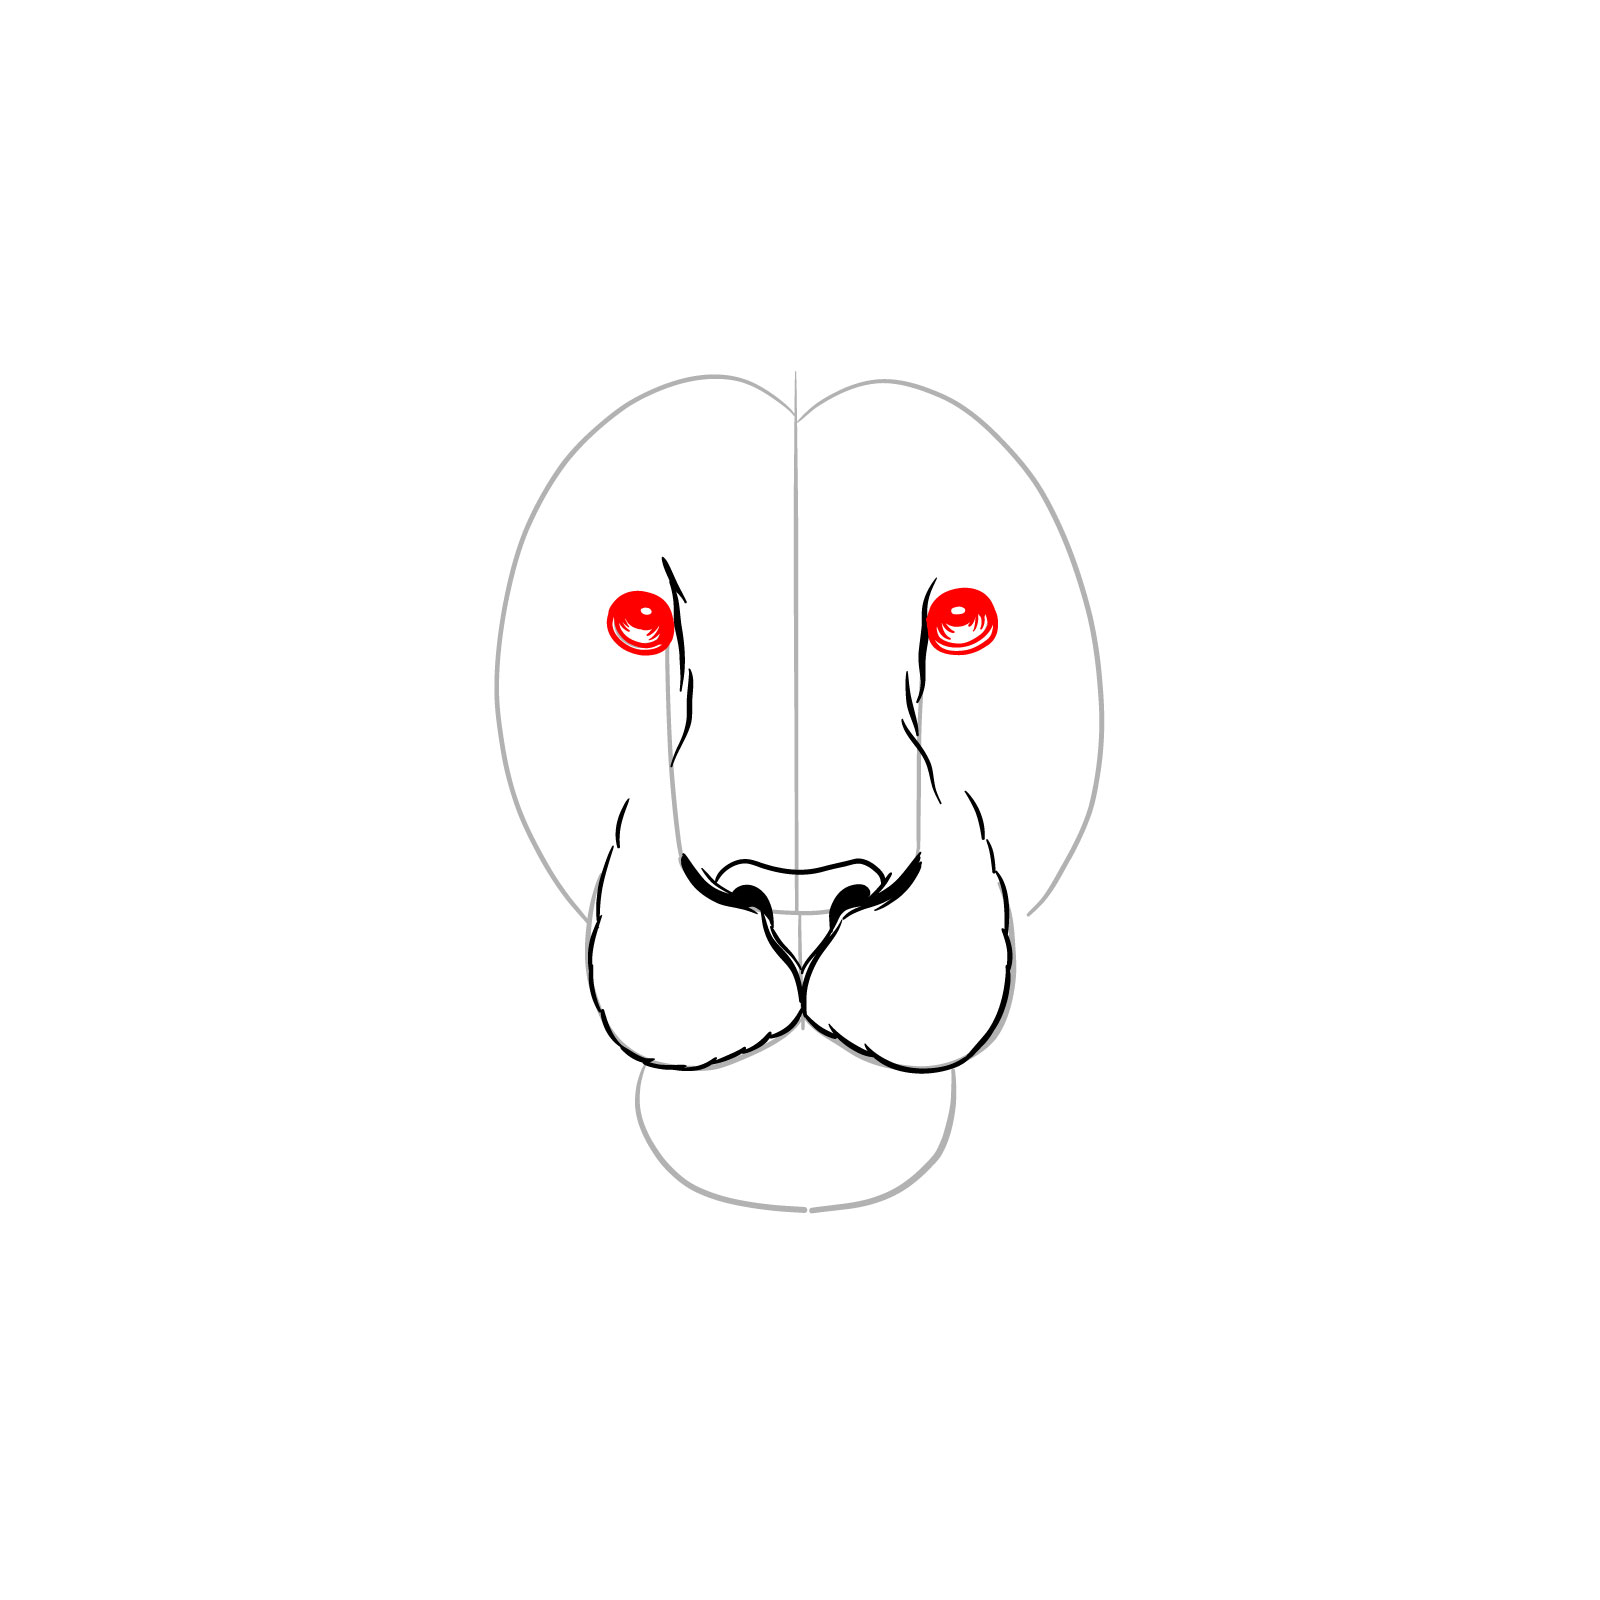 Adding eyes to the lion's face front view drawing - step 05